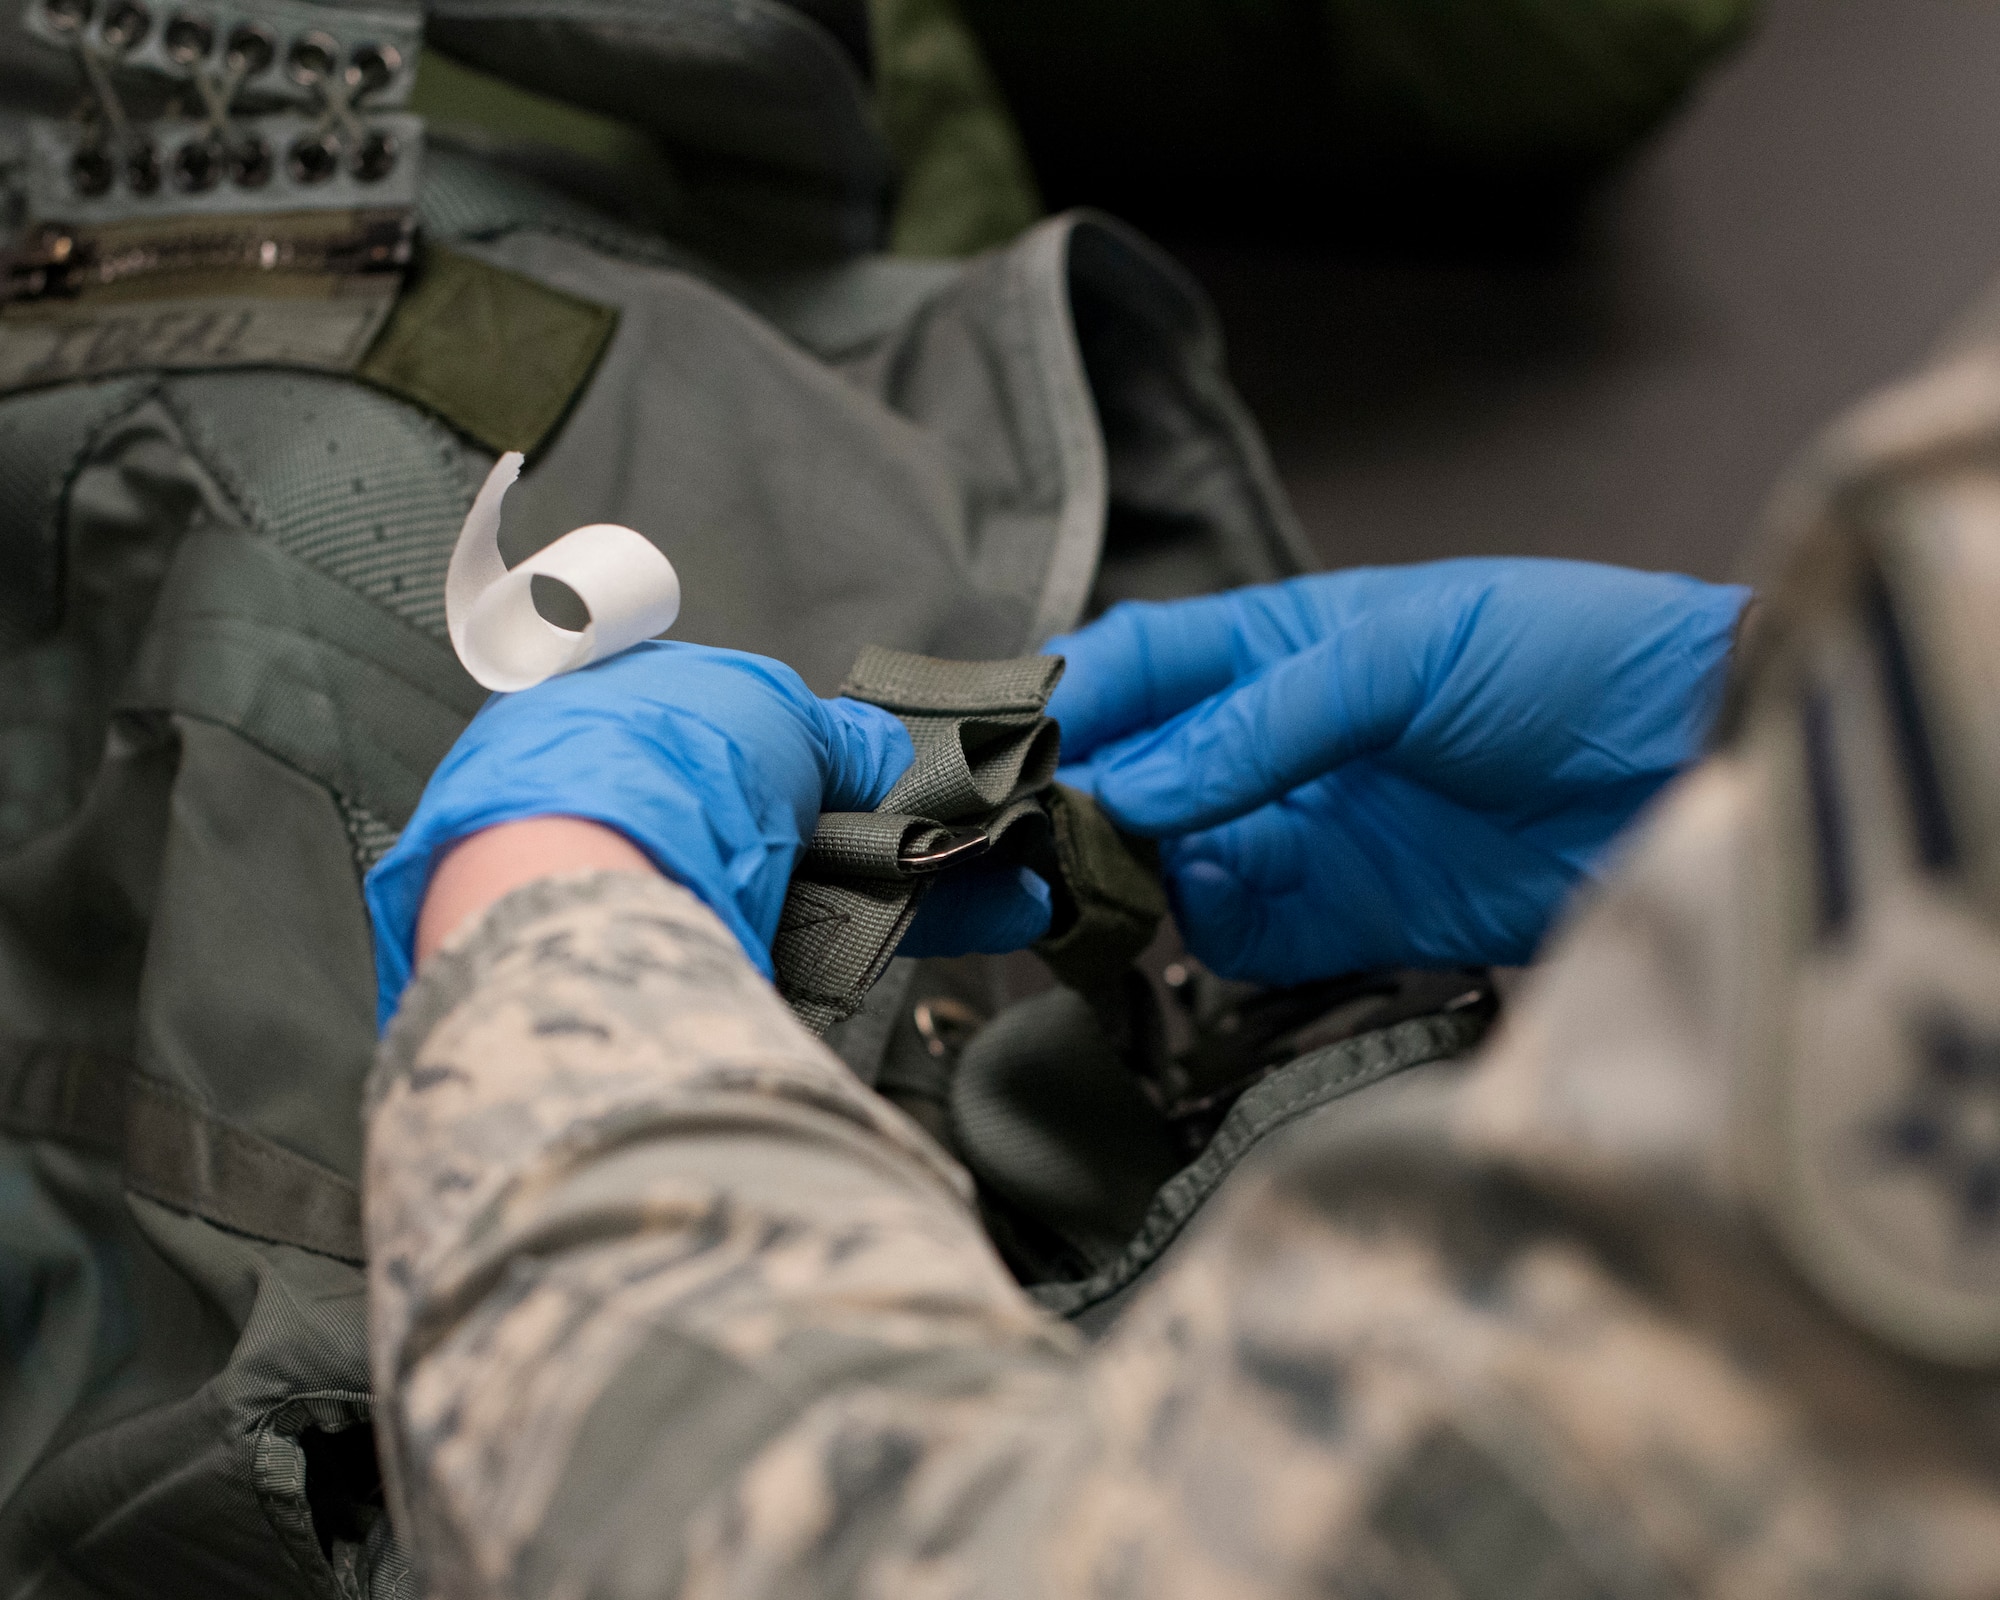 Airman 1st Class Kaci Ashby, 54th Operations Support Squadron Aircrew Flight Equipment technician, tapes a strap on a Life Preserver Unit, April 24, 2019, on Hill Air Force Base, Utah. Pilots with the 311th Fighter Squadron had the opportunity to fly over water during exercise Venom 19-01, and required specialized equipment in the event of an ejection over water. (U.S. Air Force photo by Staff Sgt. BreeAnn Sachs)